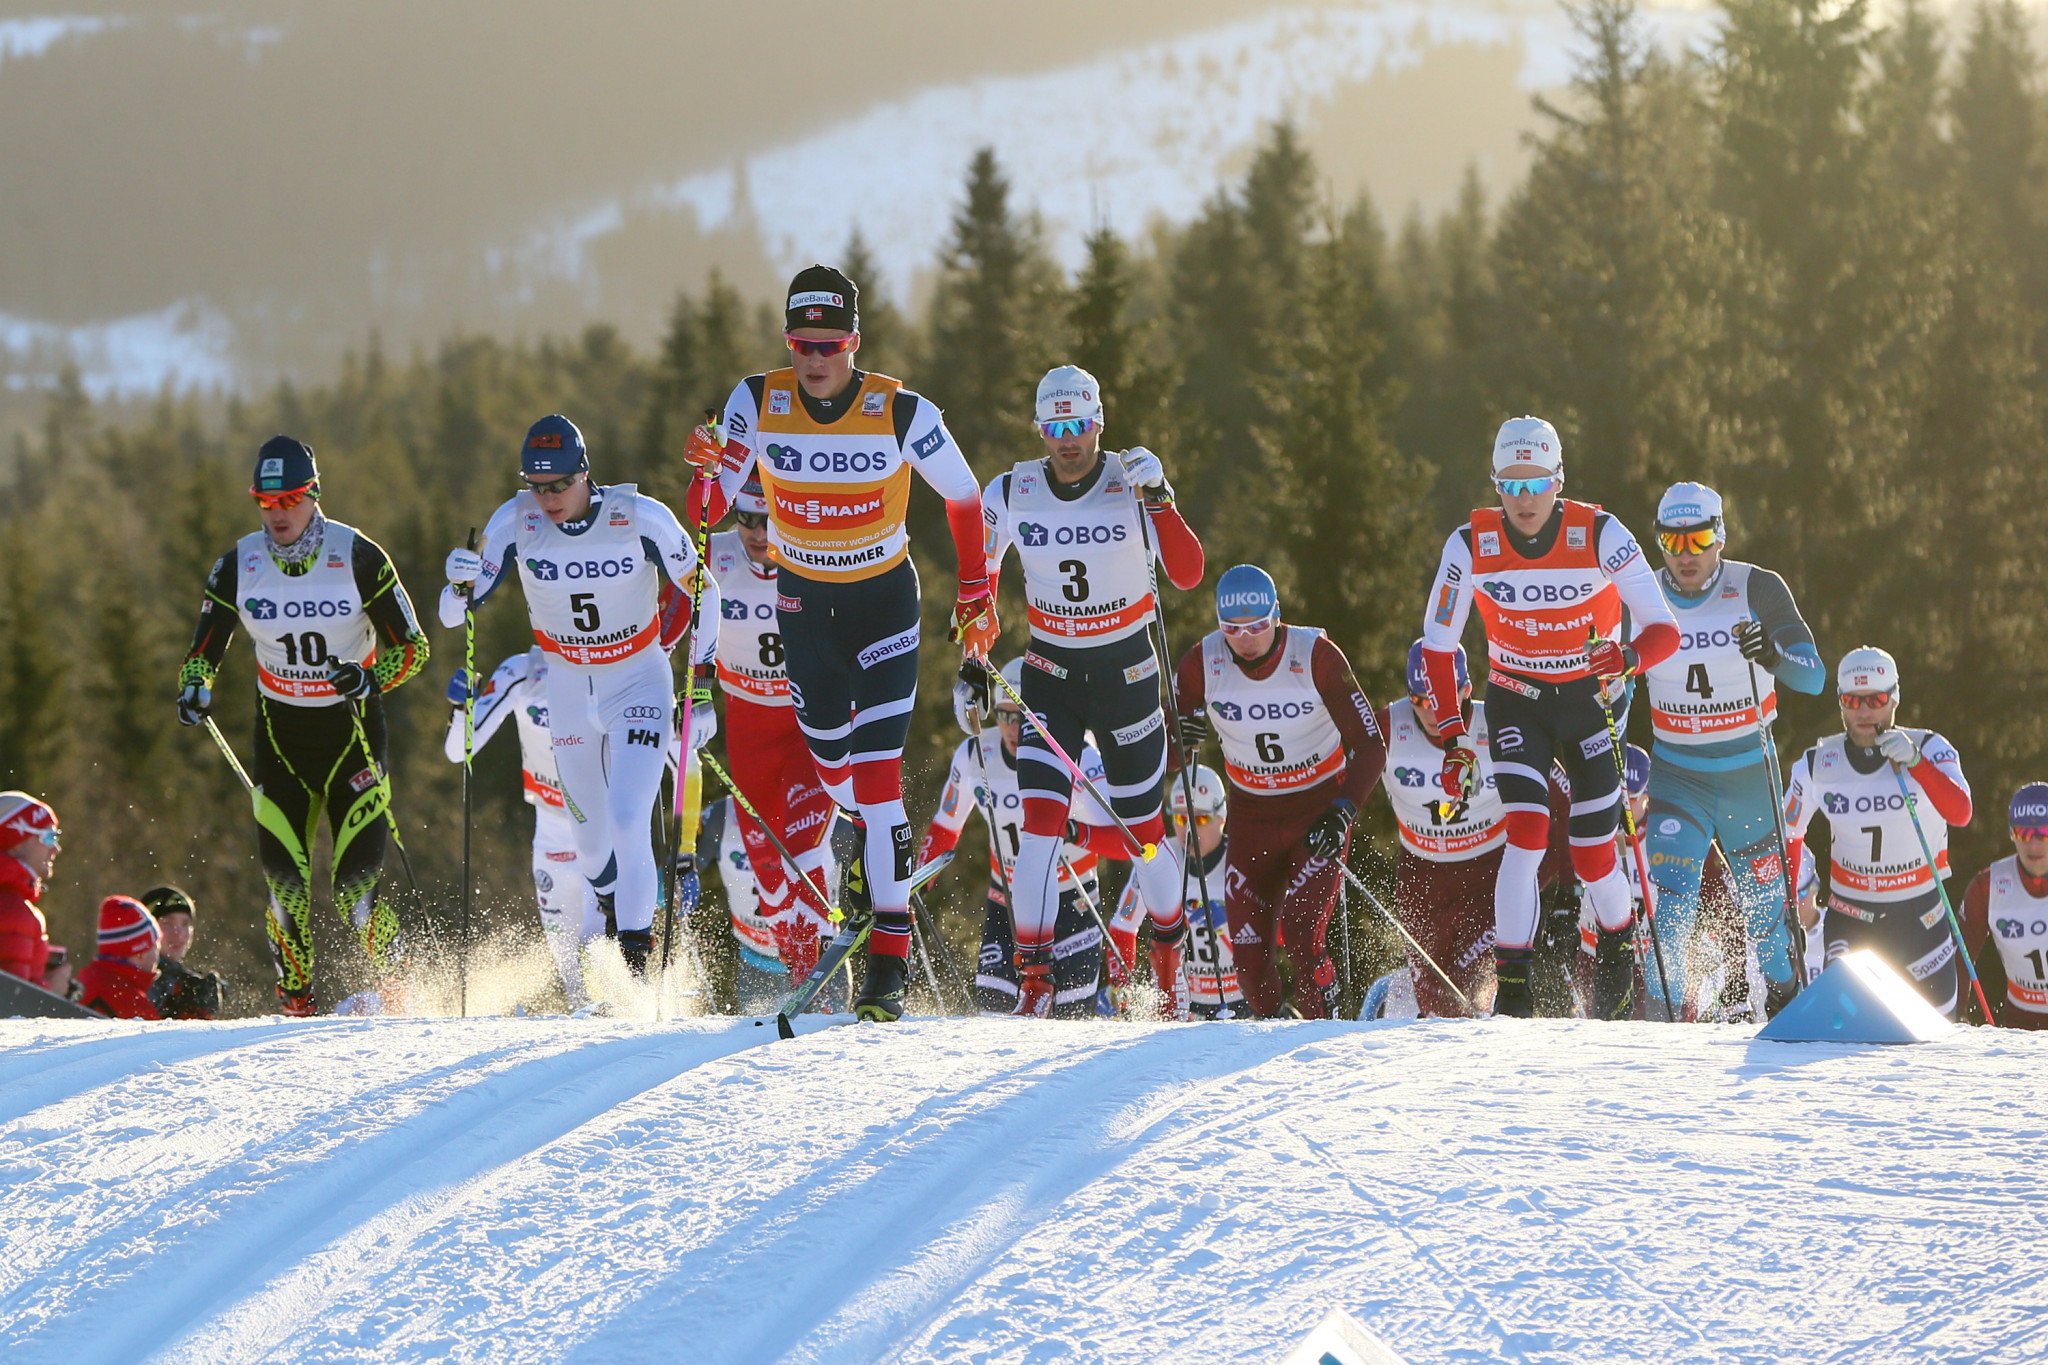 Norway, Sweden and Finland withdraw from December's Cross-Country World Cup races